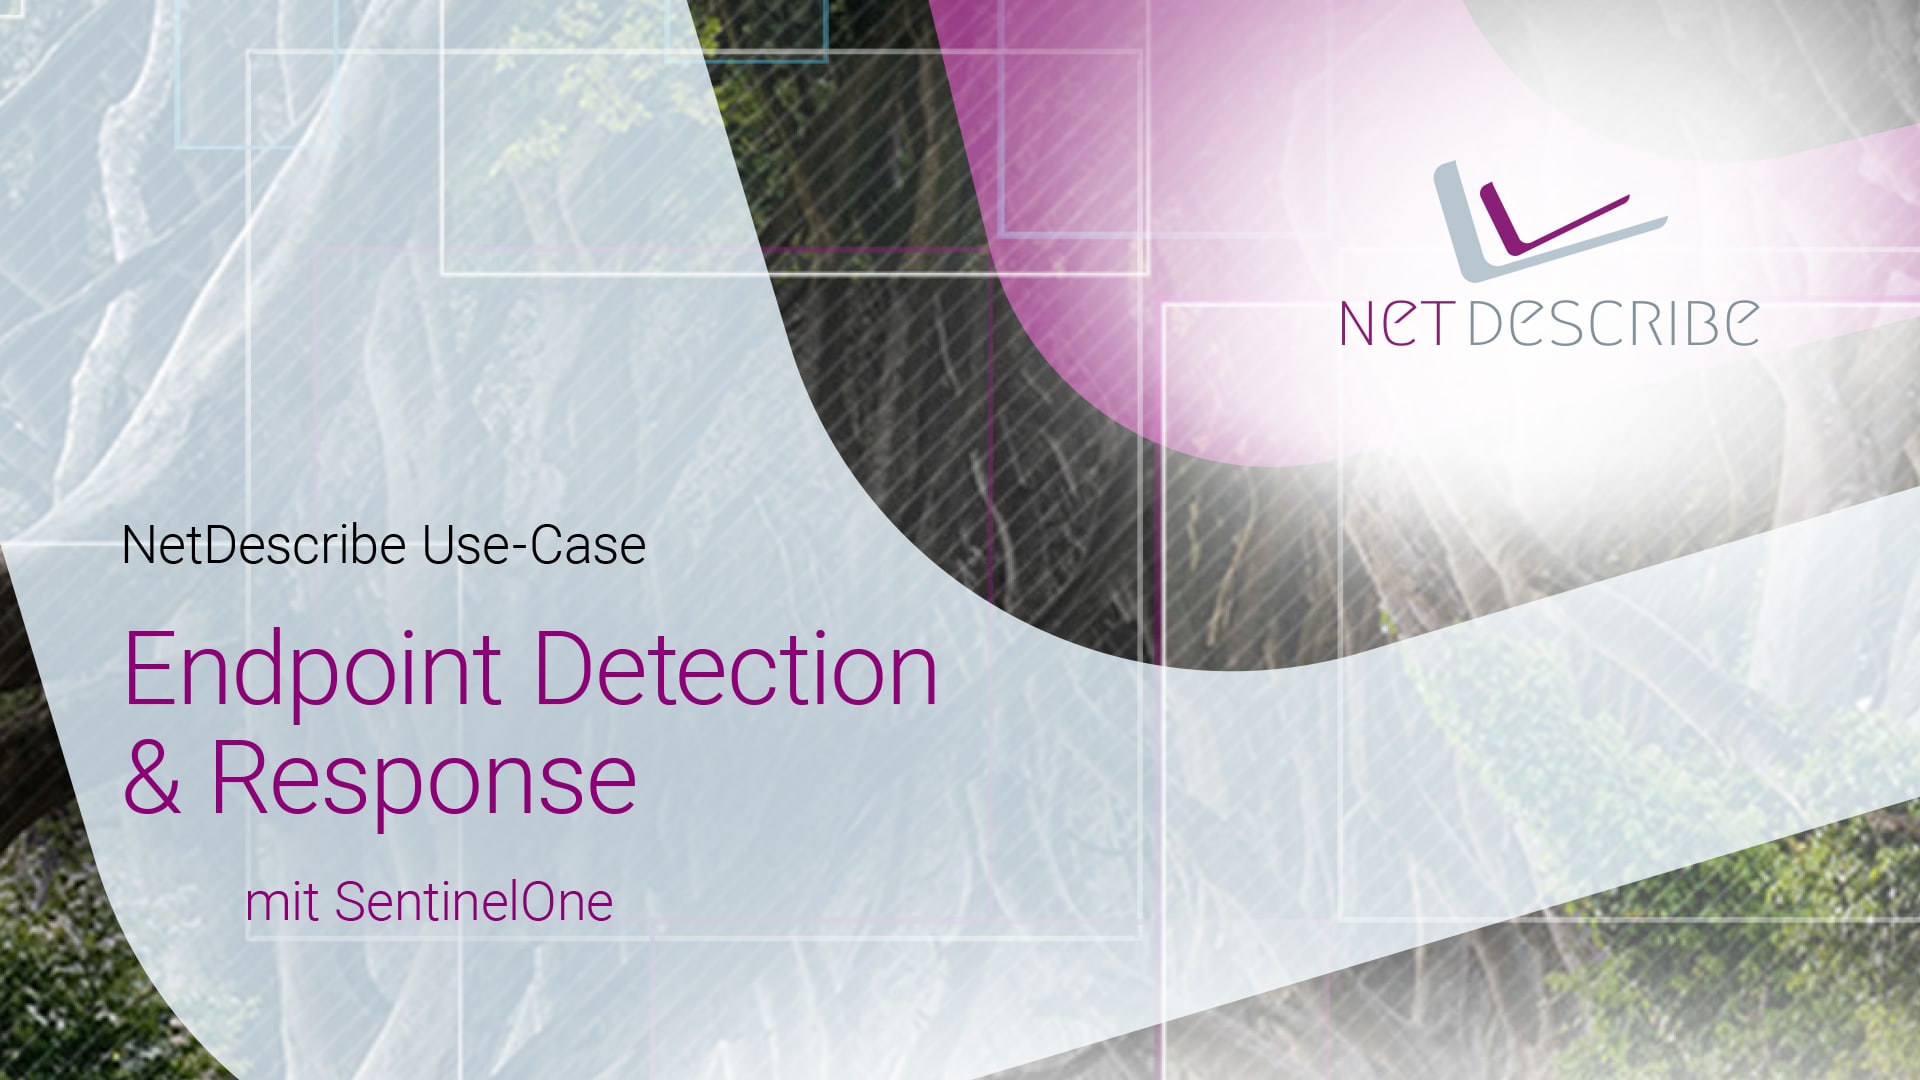 Use-Case Endpoint Detection ] Response mit SentinelOne.